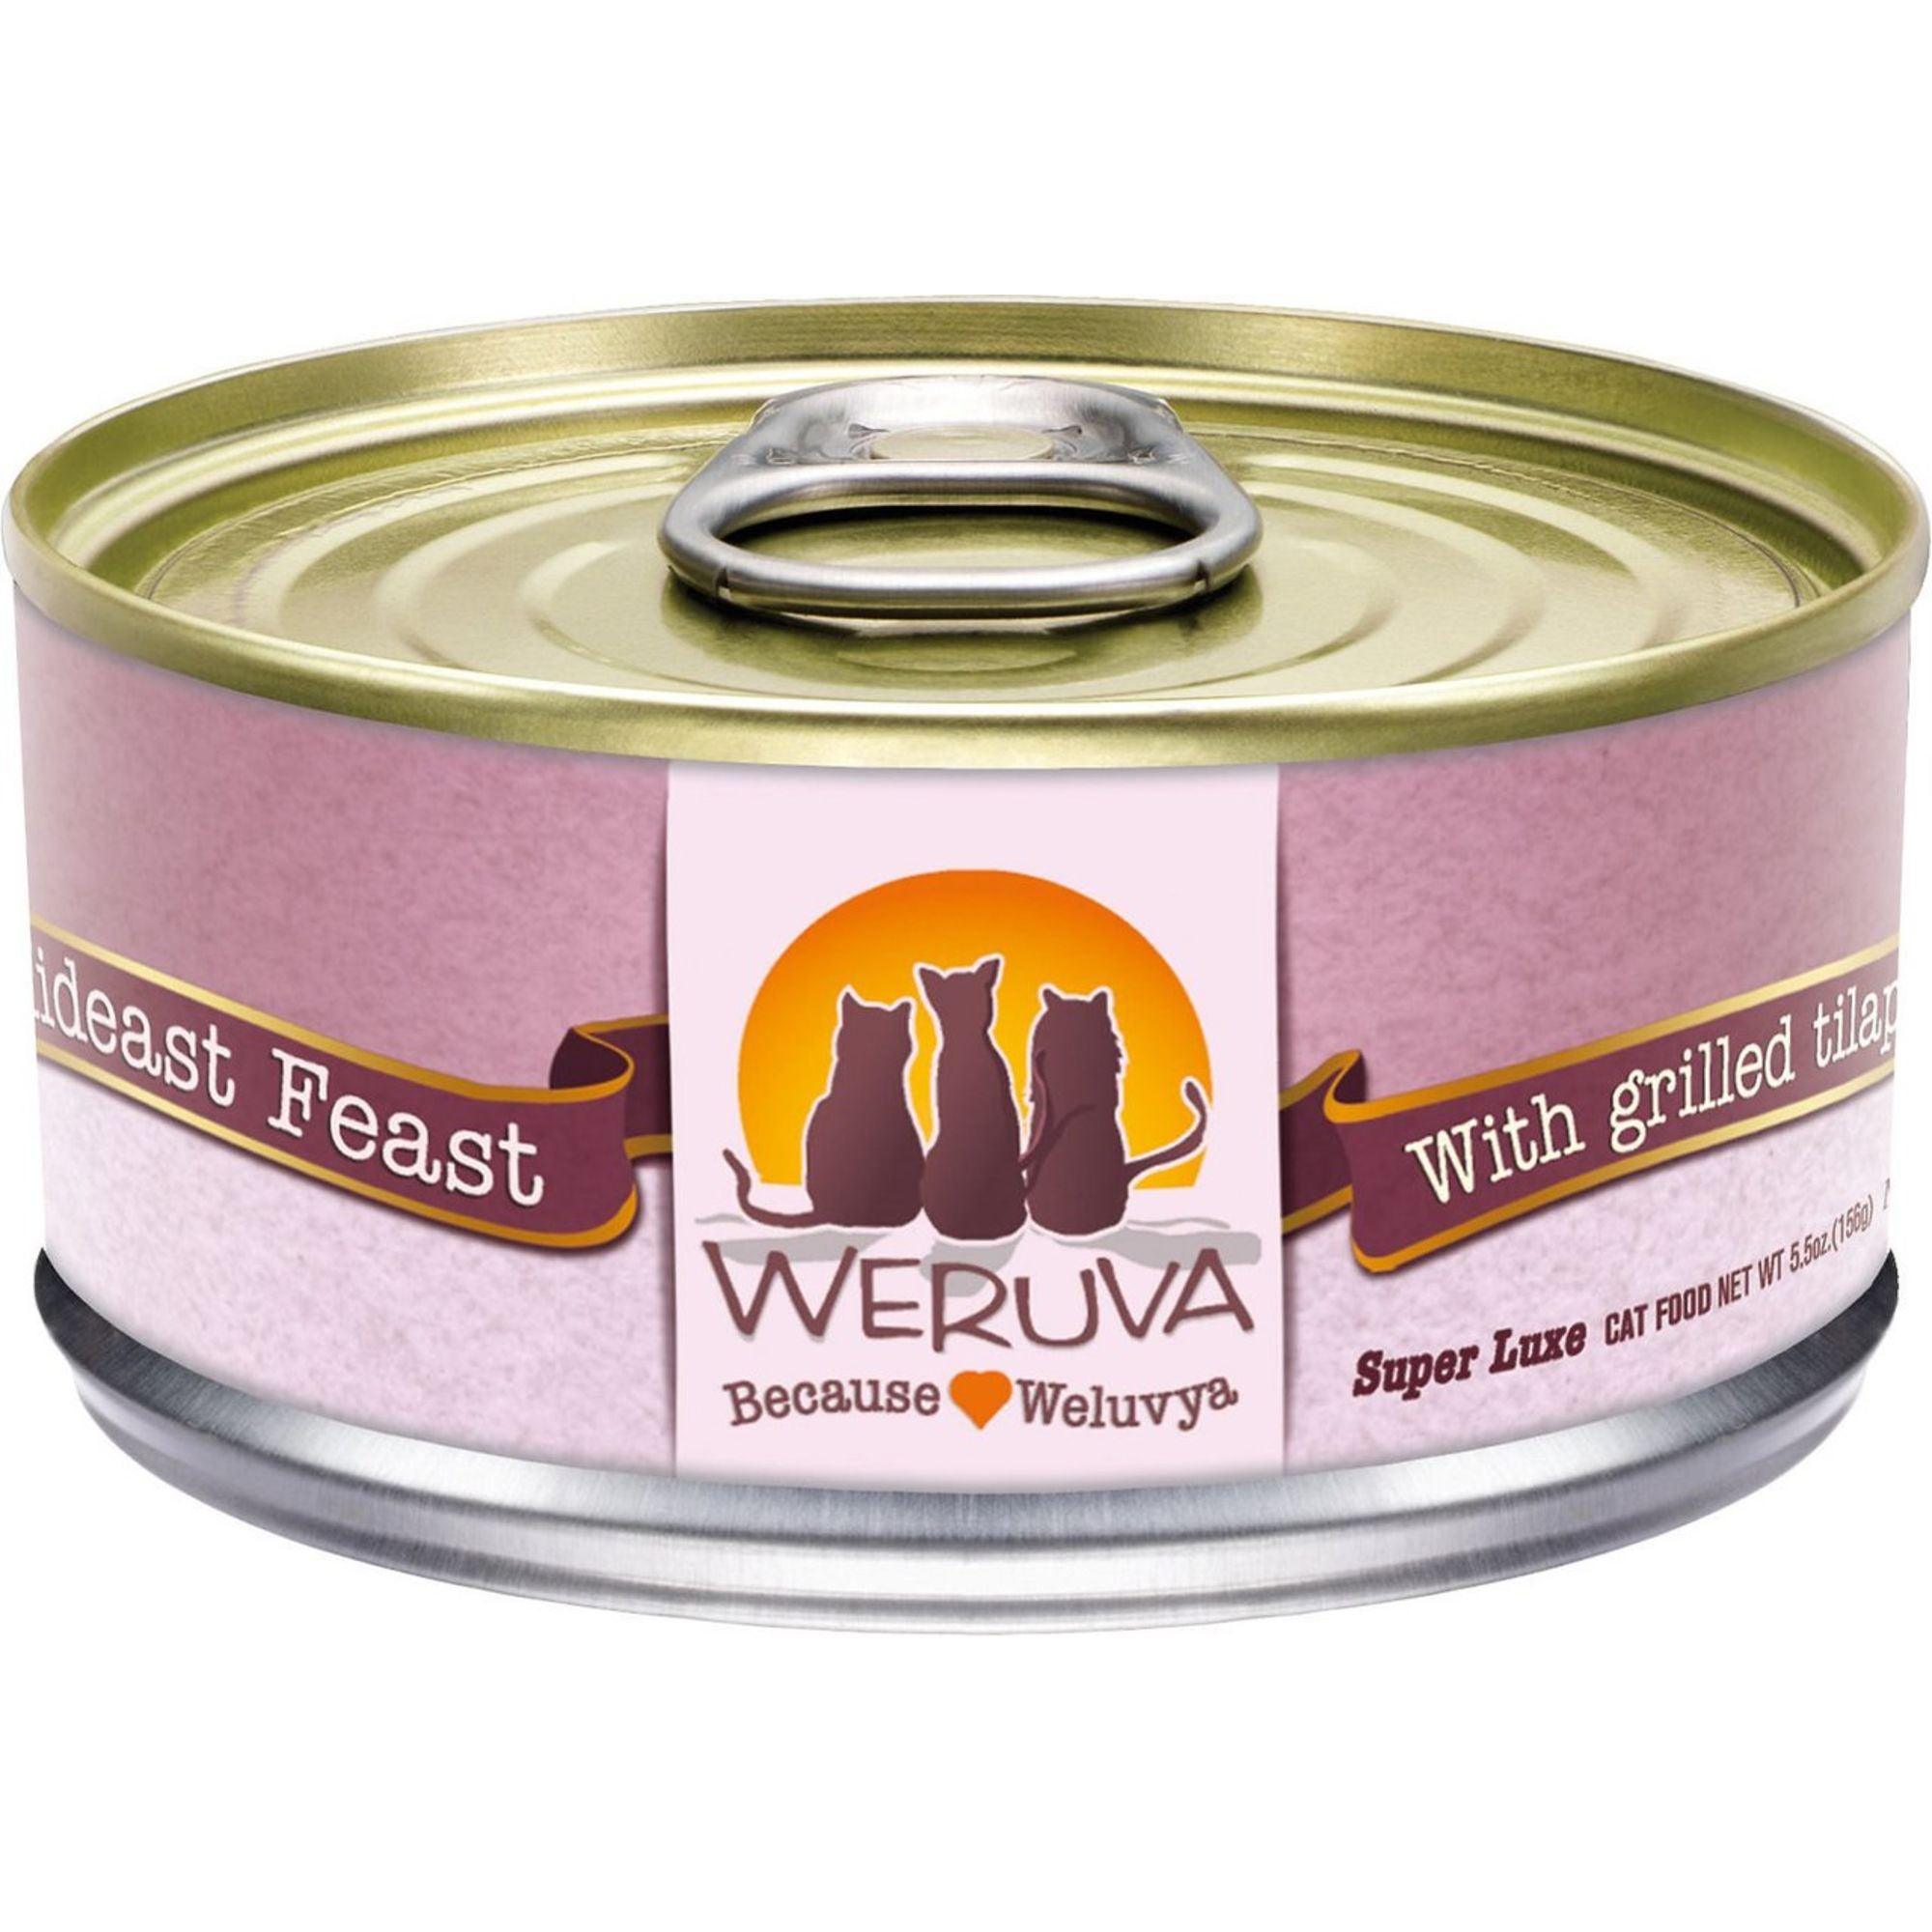 Mideast Feast With Grilled Tilapia In Gravy Grain-Free Canned Cat Food - Rocky & Maggie's Pet Boutique and Salon